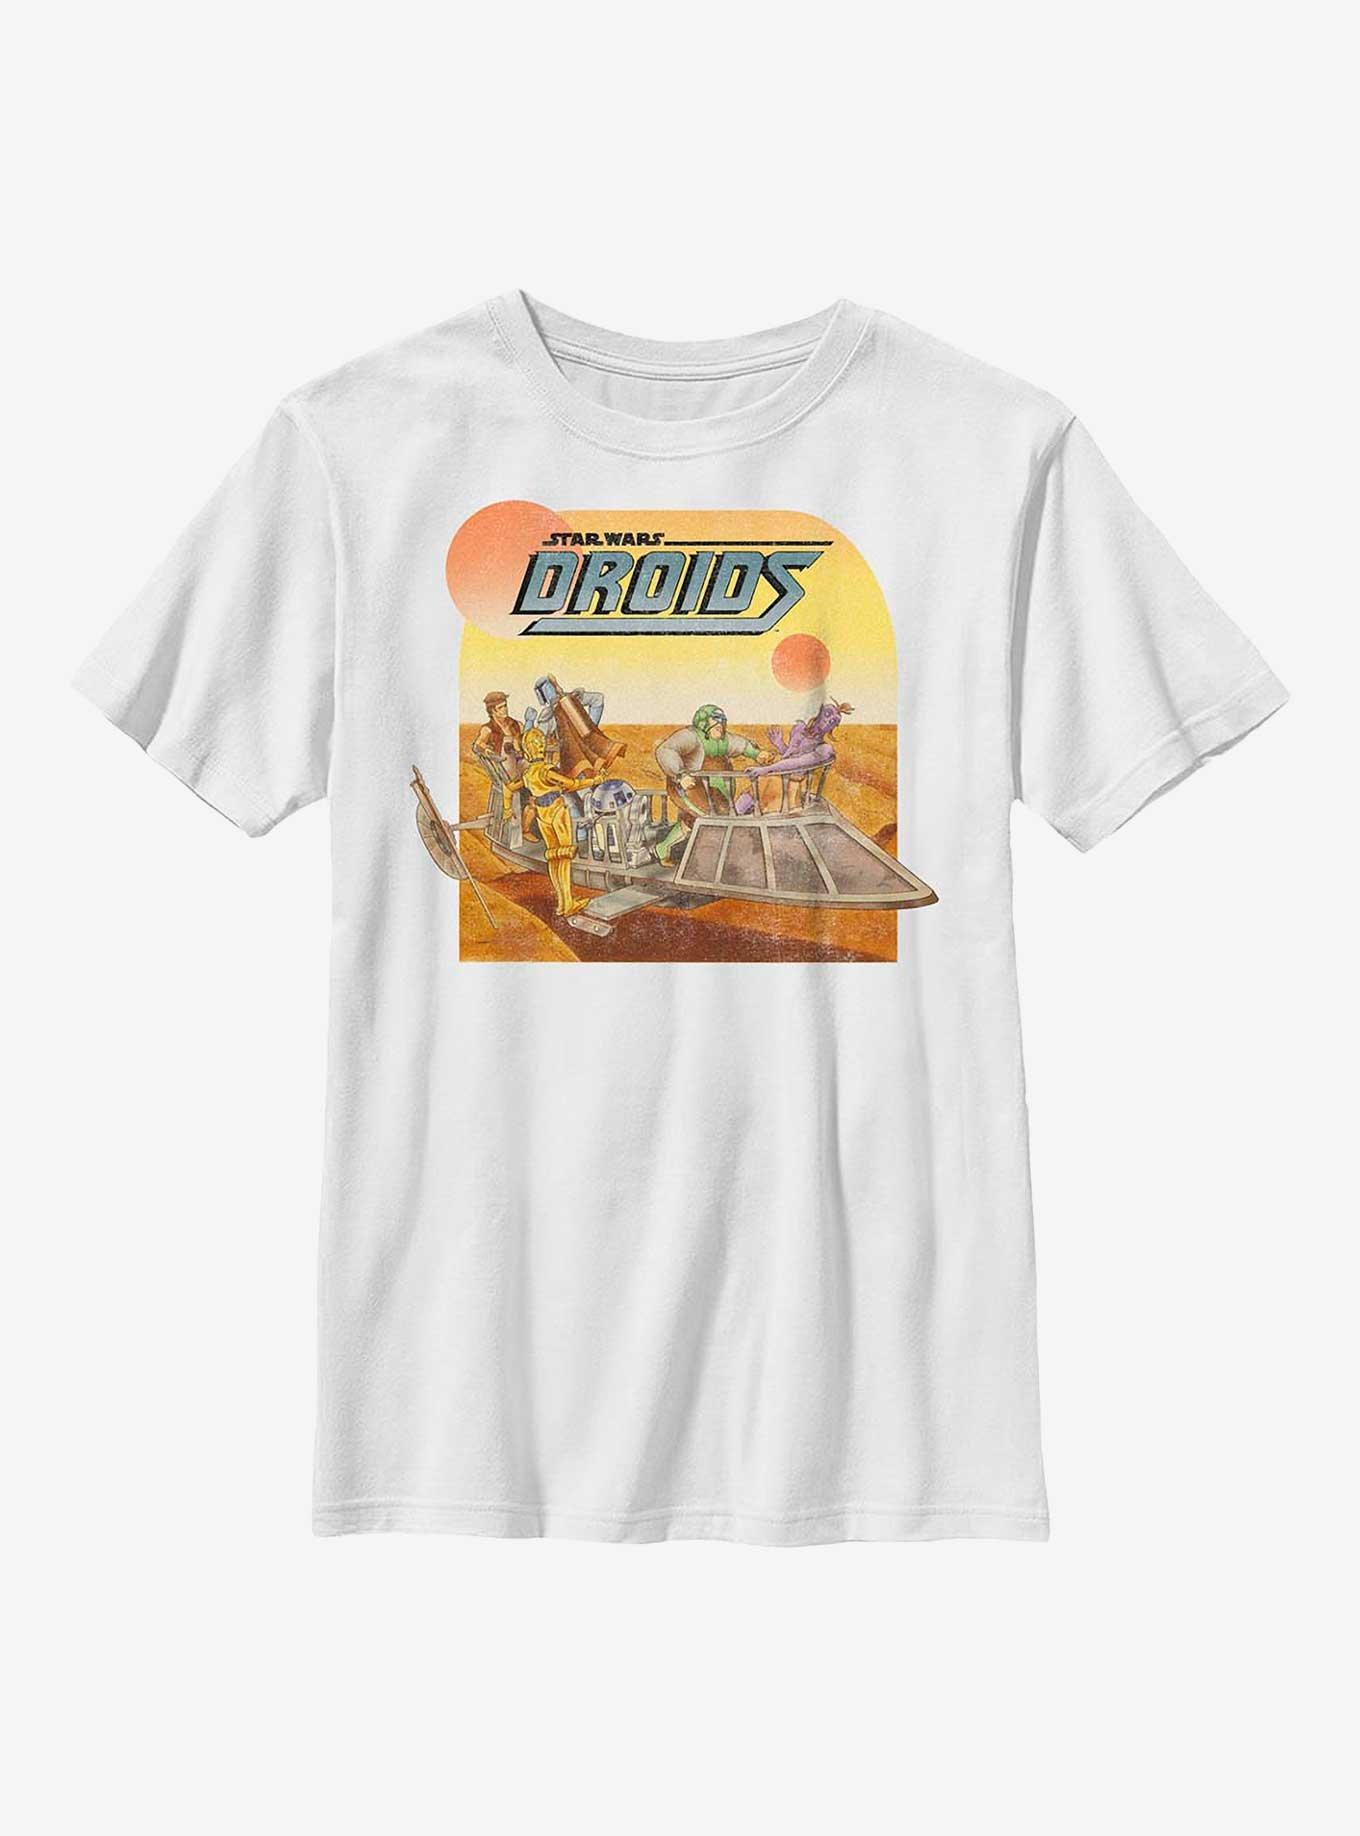 Star Wars Droid Sunset Youth T-Shirt, WHITE, hi-res